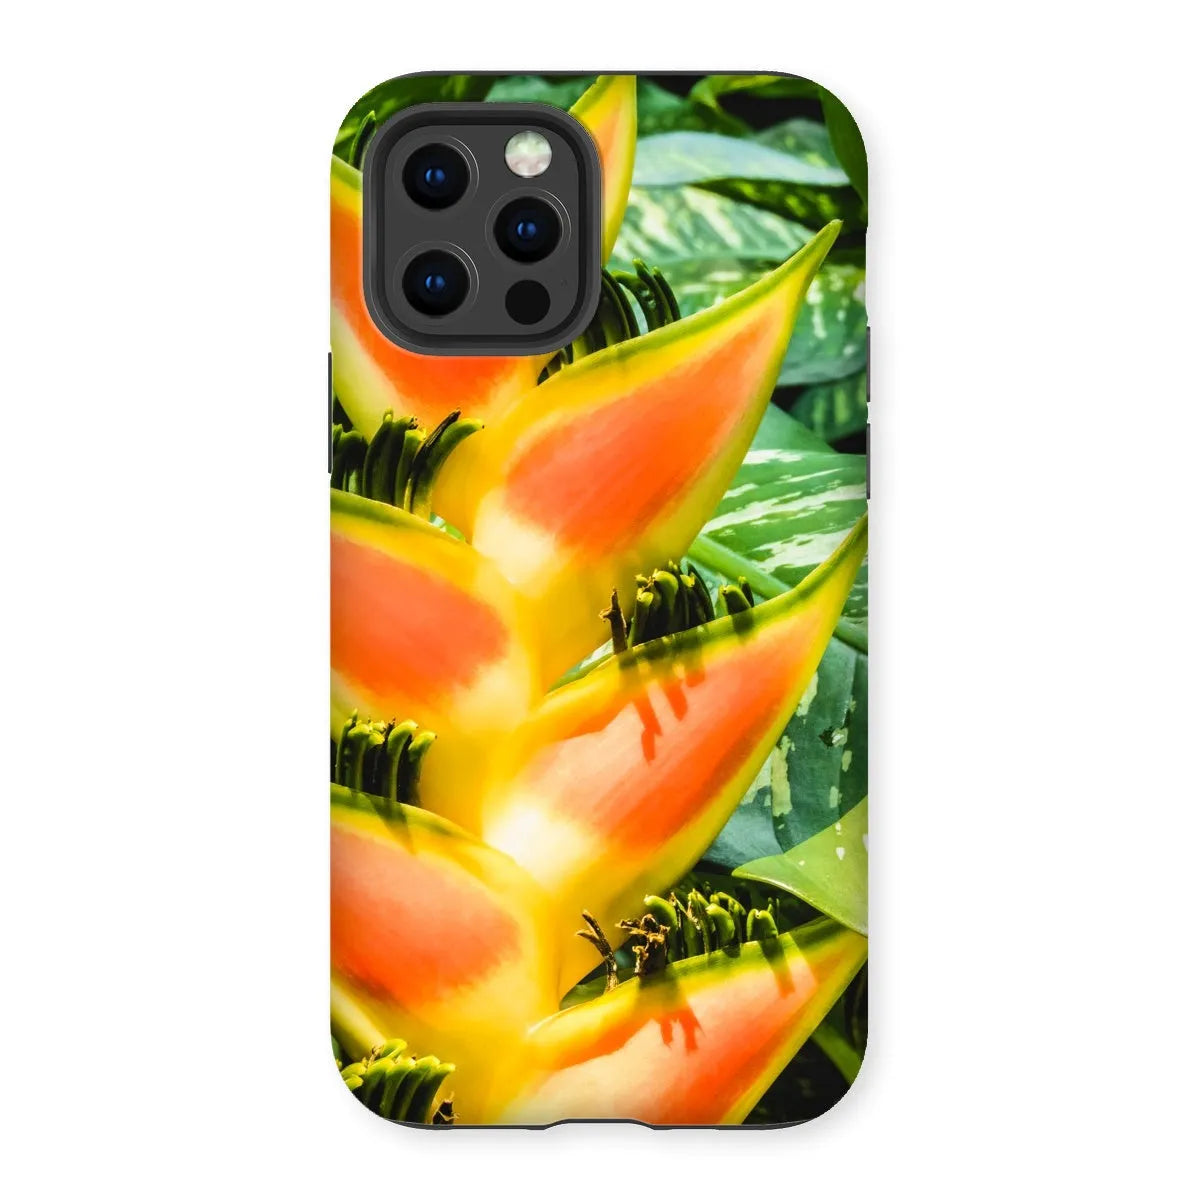 Showstopper Tough Phone Case - Iphone 12 Pro / Matte - Mobile Phone Cases - Aesthetic Art